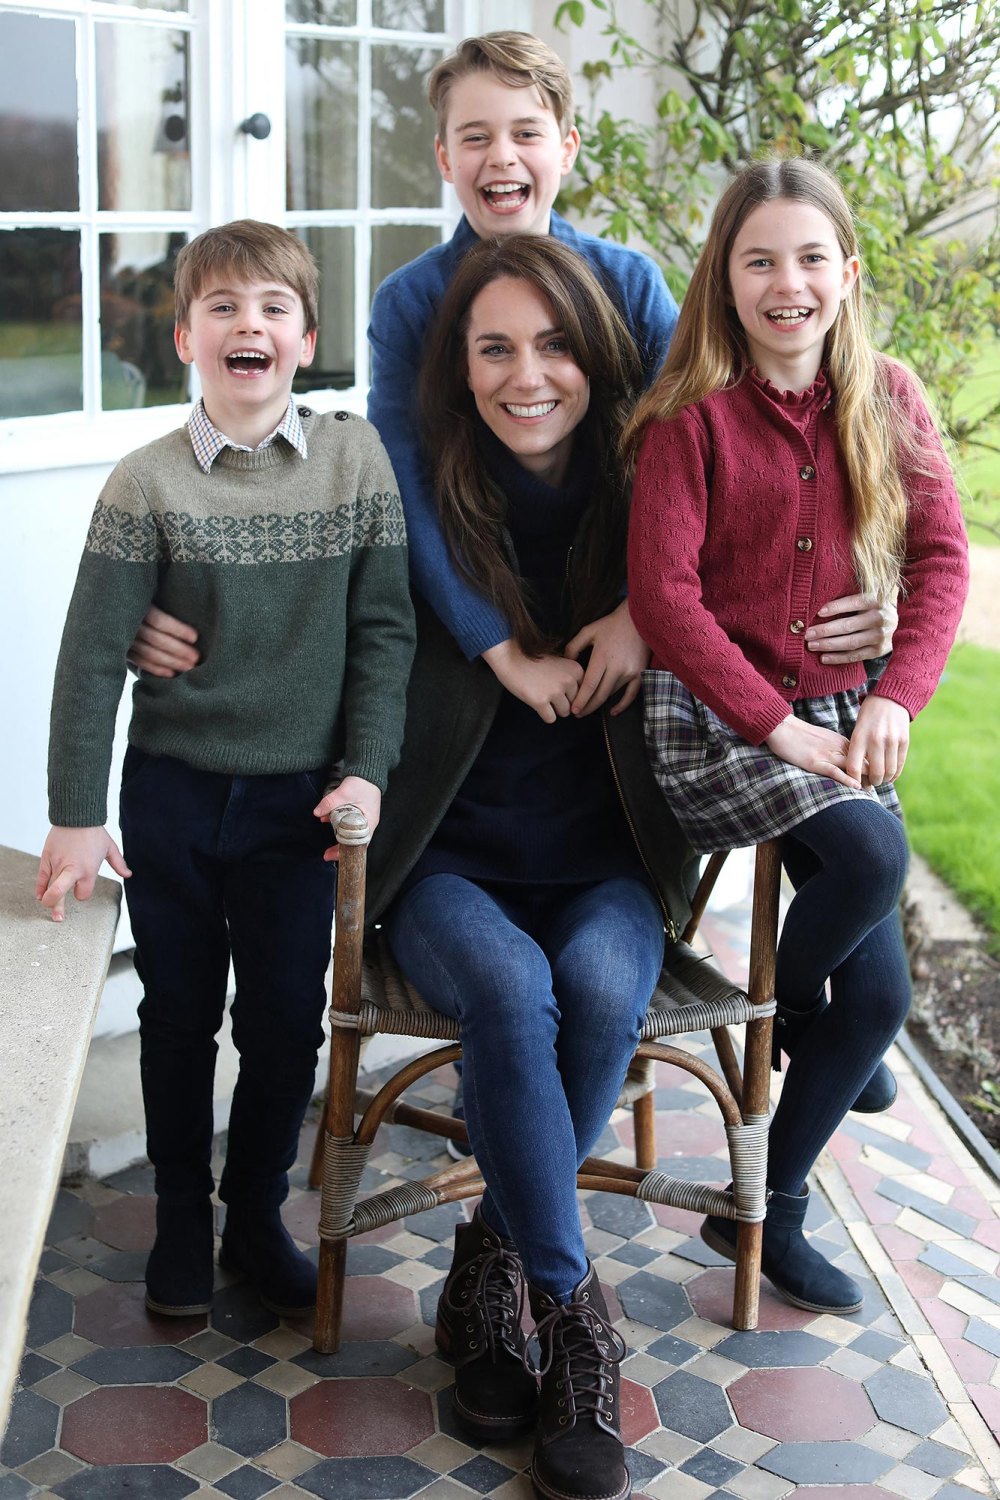 Another Royal Family Photo Taken by Kate Middleton Was Manipulated 2